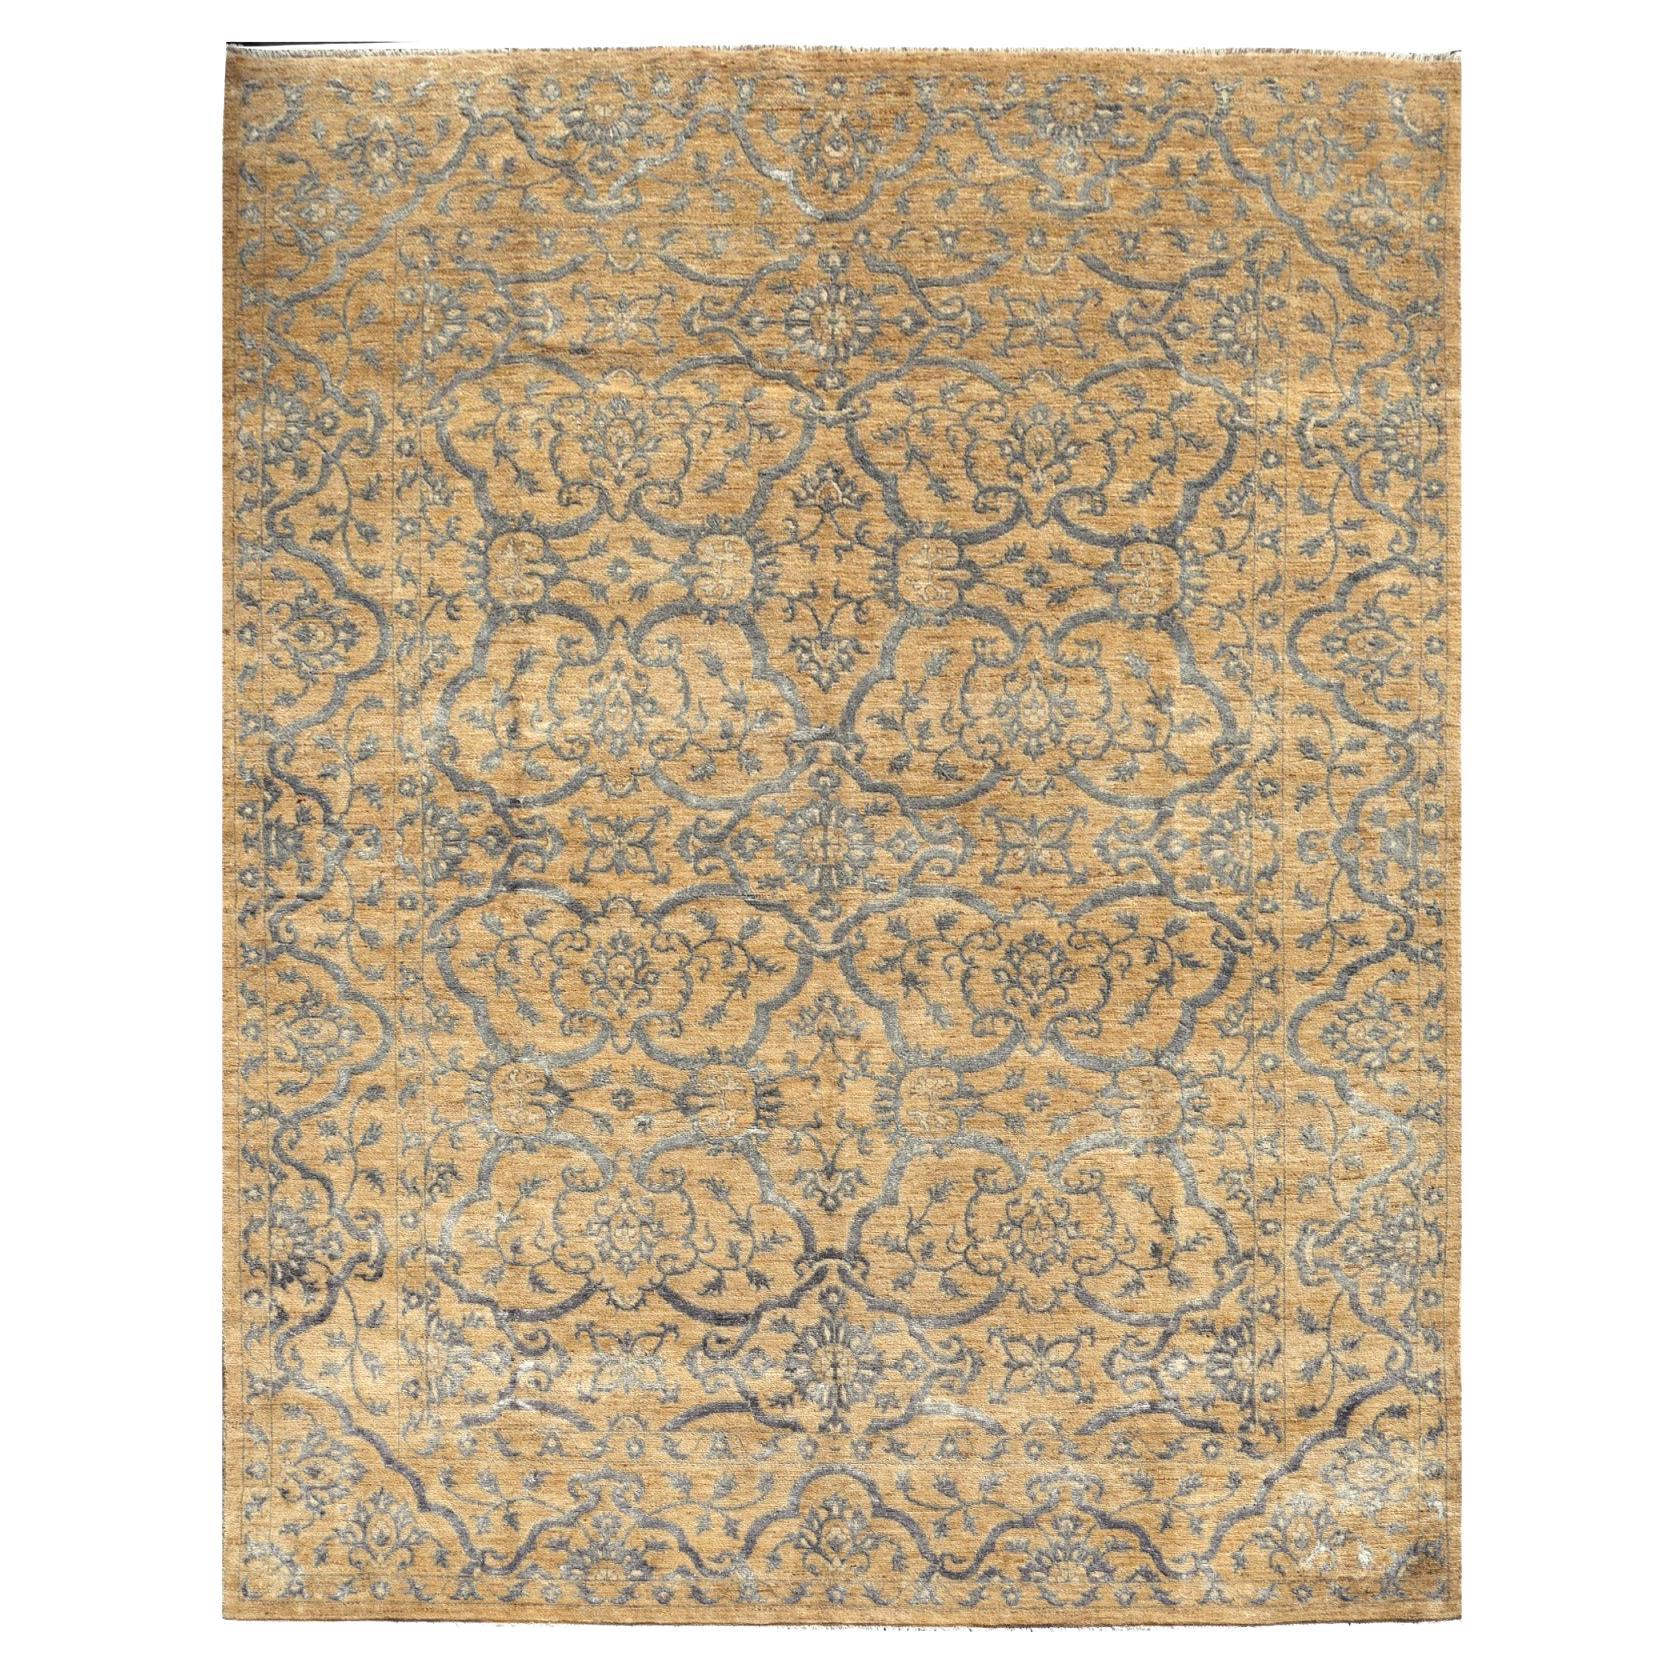 Large Hand Knotted Rug in Style of Transitional Polonaise Carpet